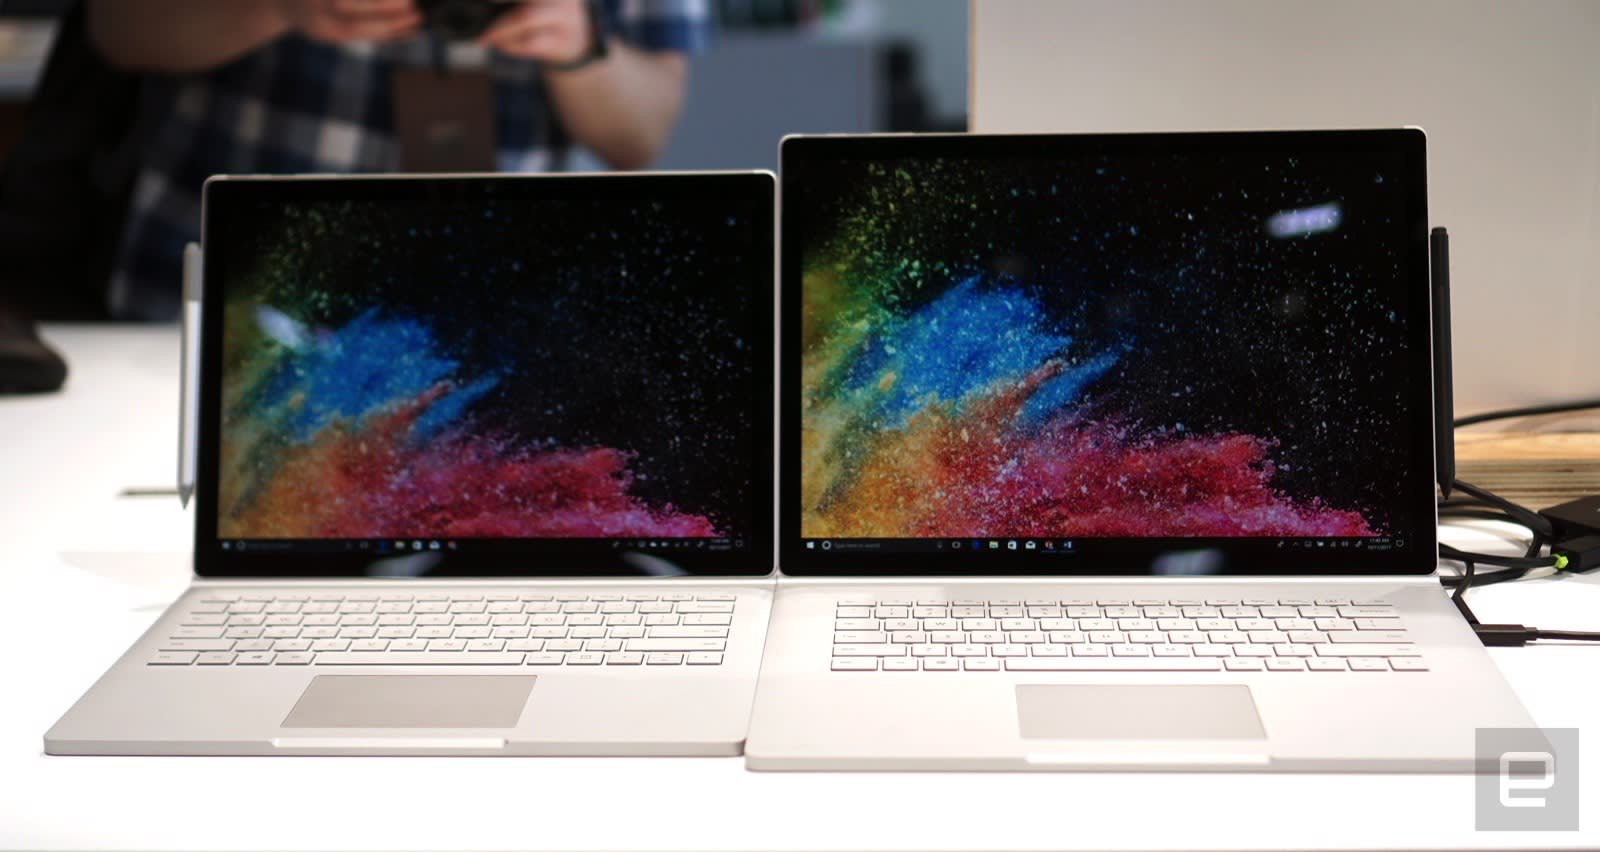 Microsoft's Surface Book 2 includes a brawnier 15-inch version